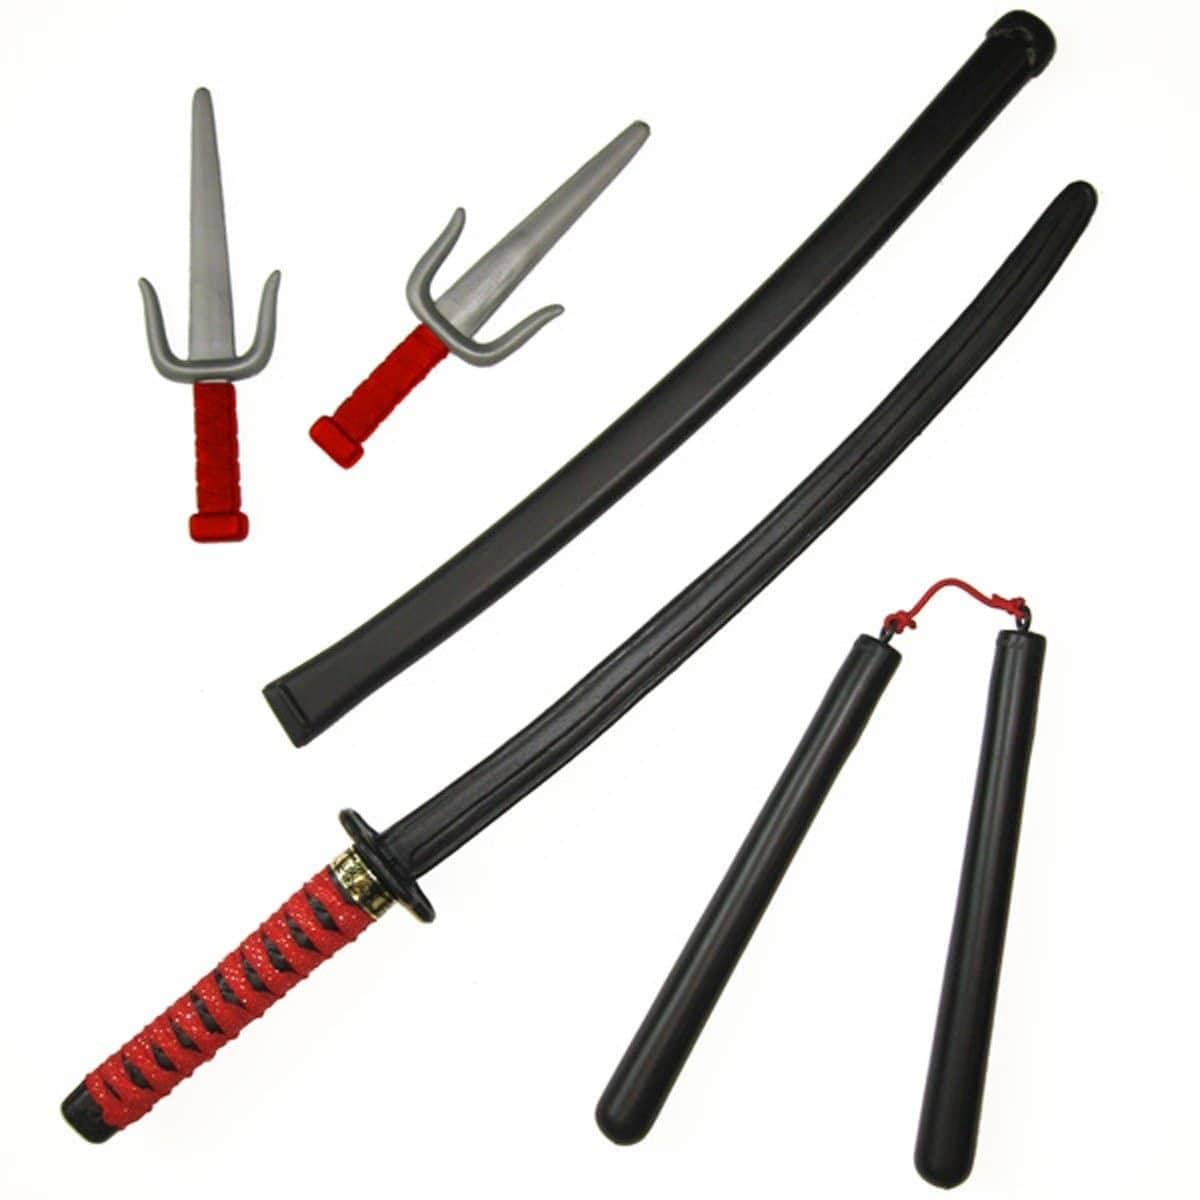 Buy Costume Accessories Ninja weapon kit sold at Party Expert